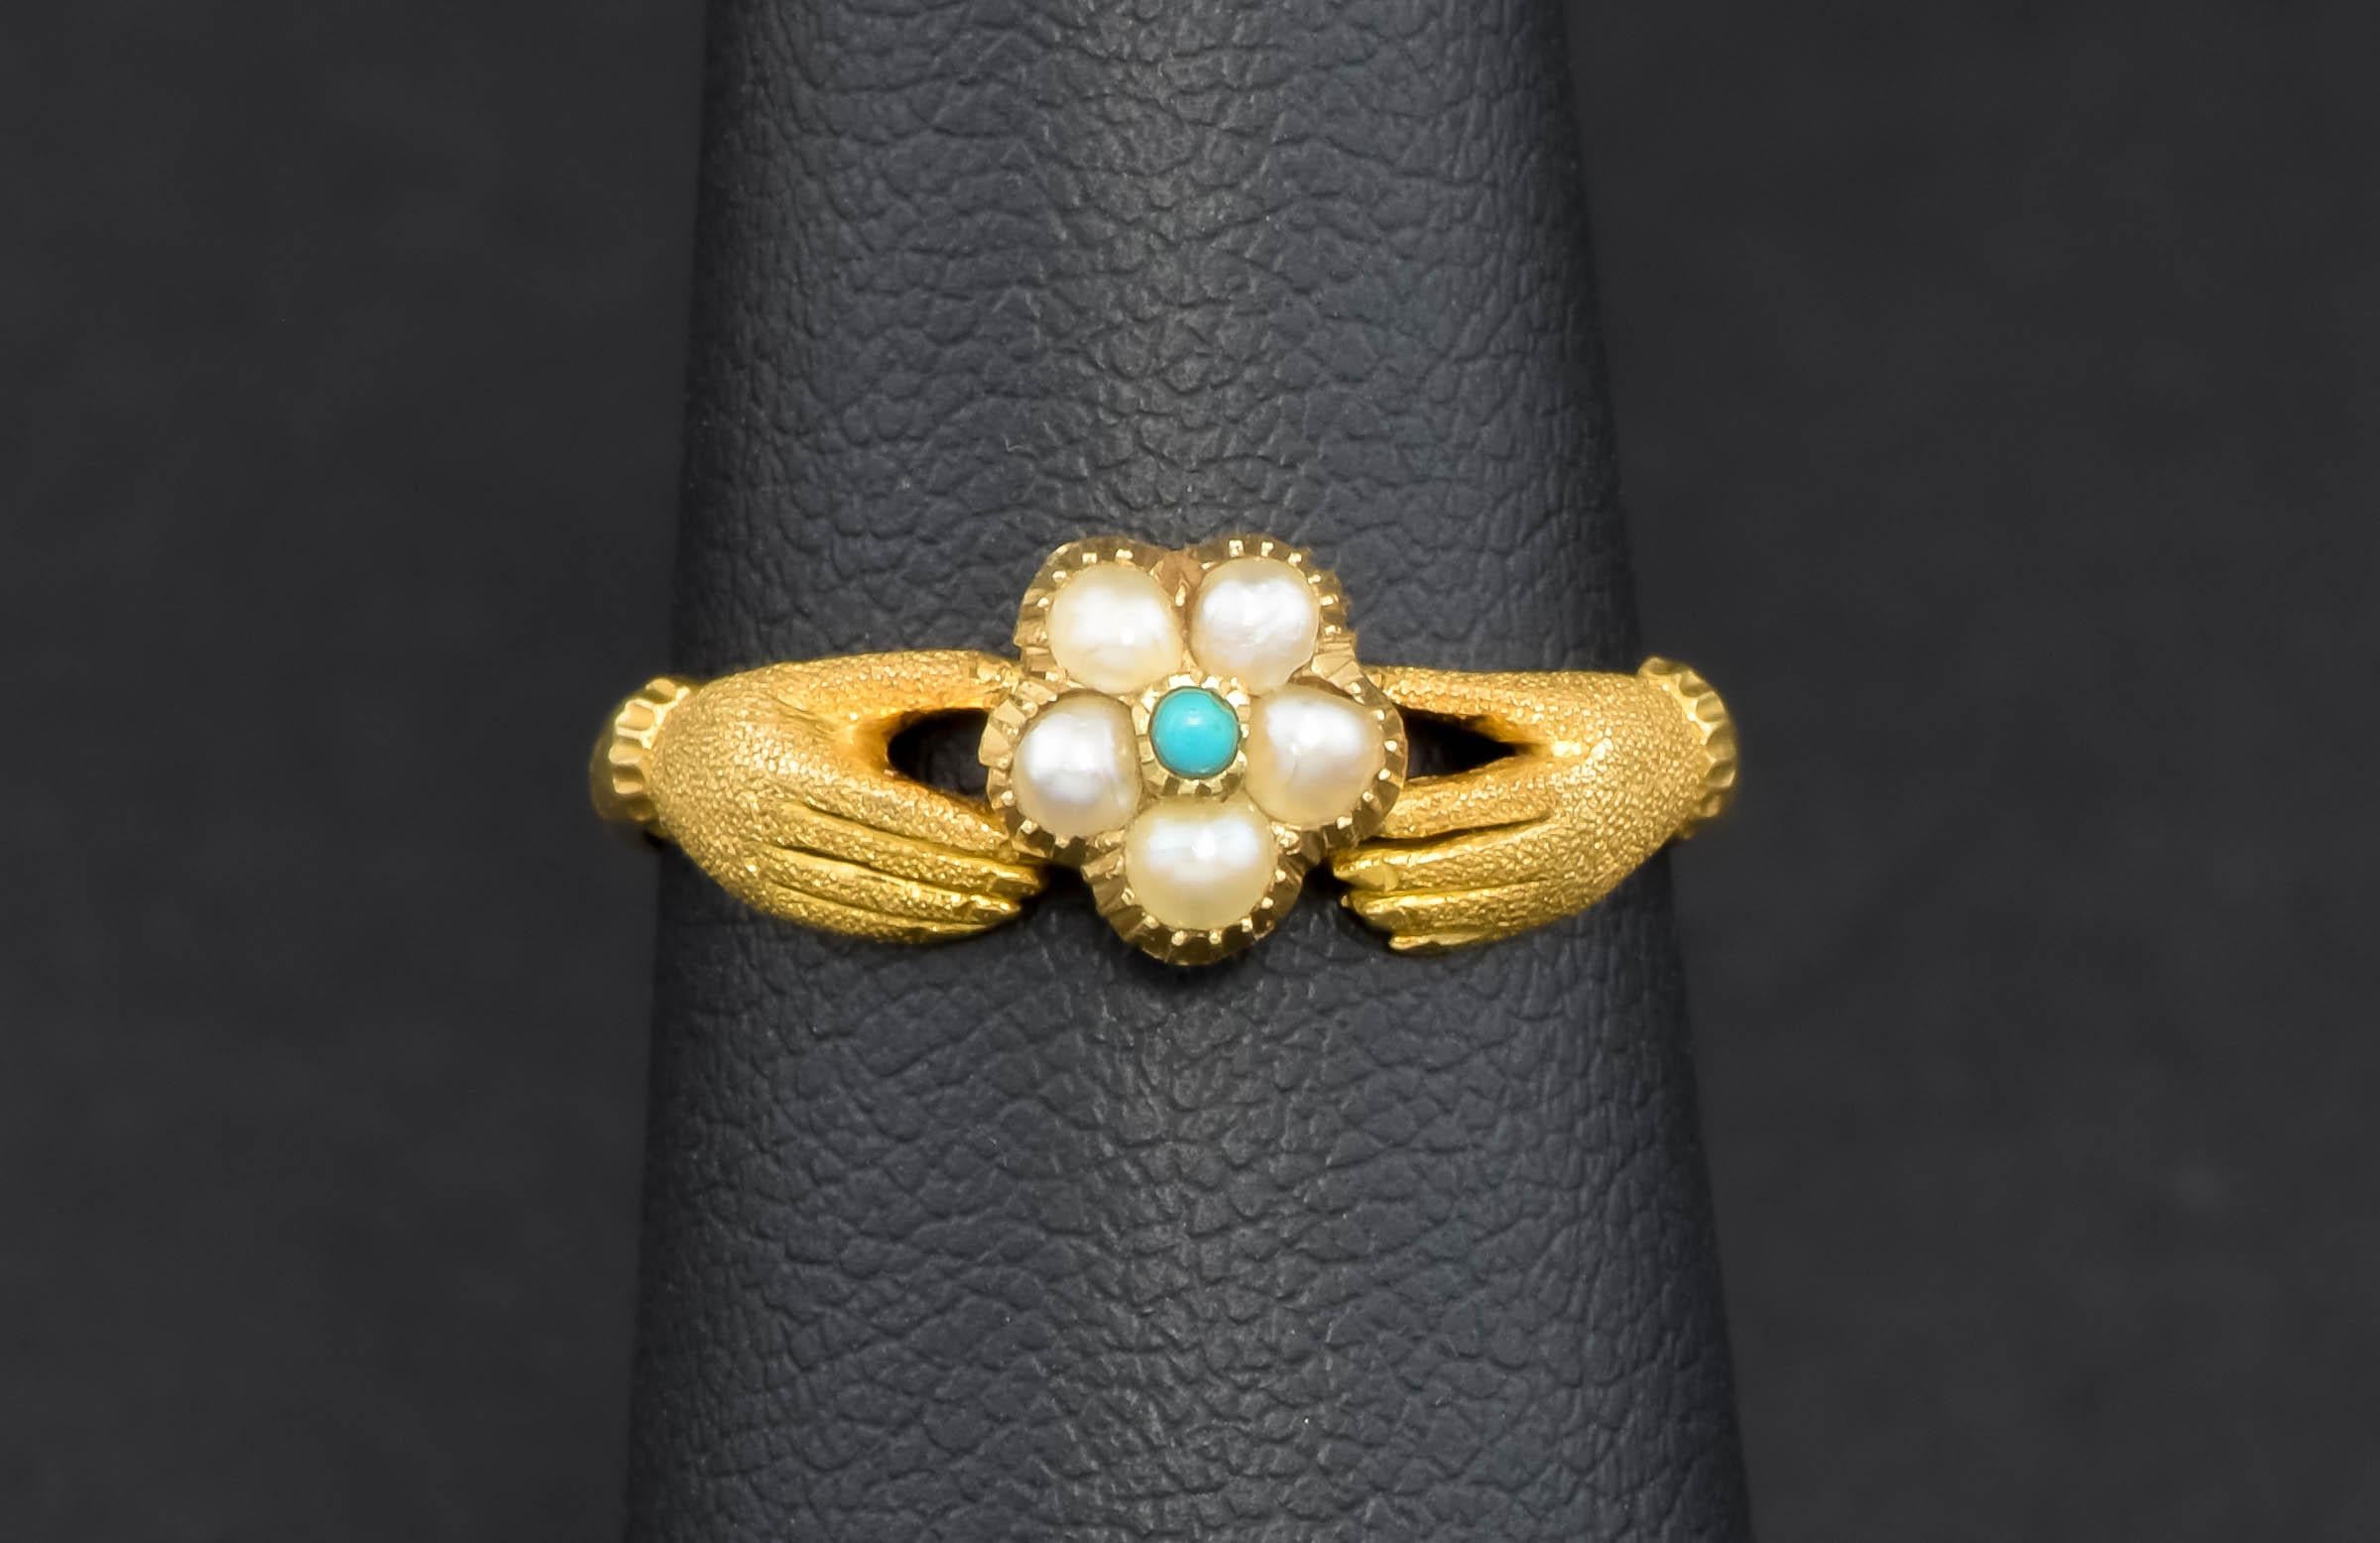 Crafted of 14K gold with a lovely bloomed finish, the ring features a classic design of two cuffed hands holding a flower (a pansy or forget-me-not, most likely, in friendship, love and remembrance.) The flower blossom’s petals are set with pearl,